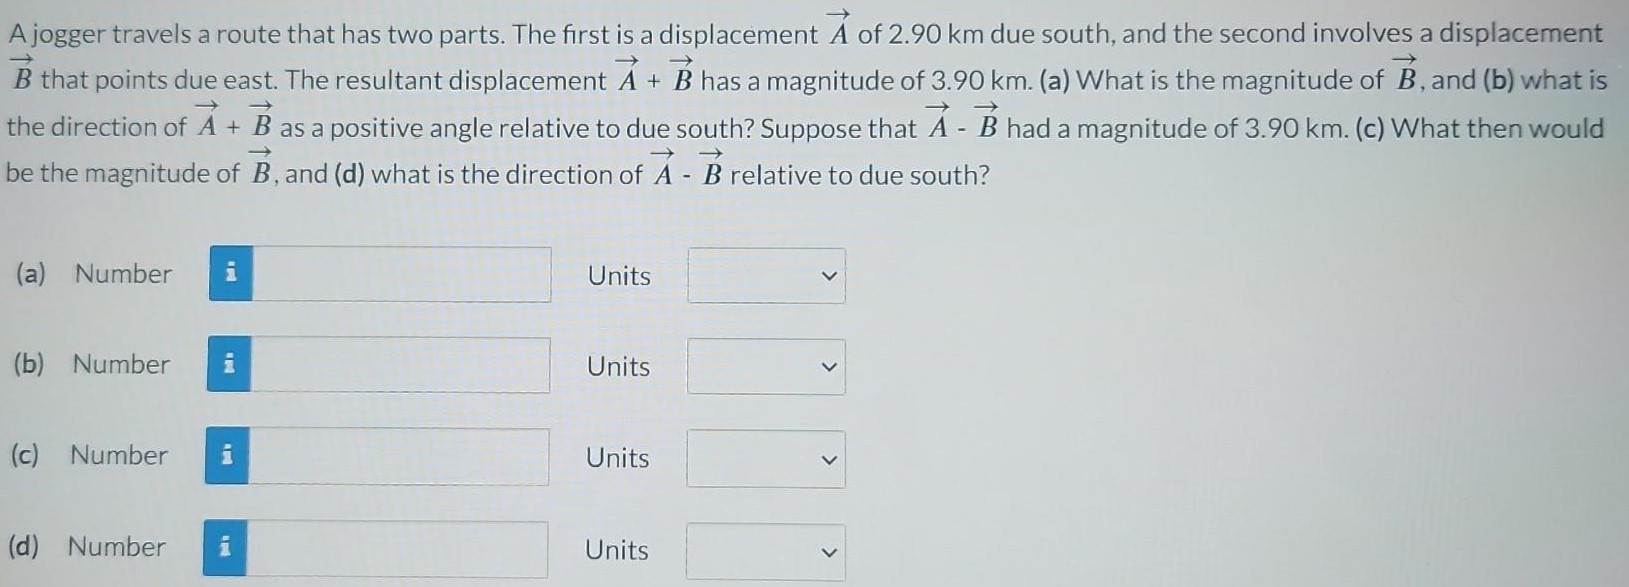 A jogger travels a route that has two parts. The first is a displacement A→ of 2.90 km due south, and the second involves a displacement B→ that points due east. The resultant displacement A→ + B→ has a magnitude of 3.90 km. (a) What is the magnitude of B→, and (b) what is the direction of A→ + B→ as a positive angle relative to due south? Suppose that A→ − B→ had a magnitude of 3.90 km. (c) What then would be the magnitude of B→, and (d) what is the direction of A→ − B→ relative to due south? (a) Number Units (b) Number Units (c) Number Units (d) Number Units